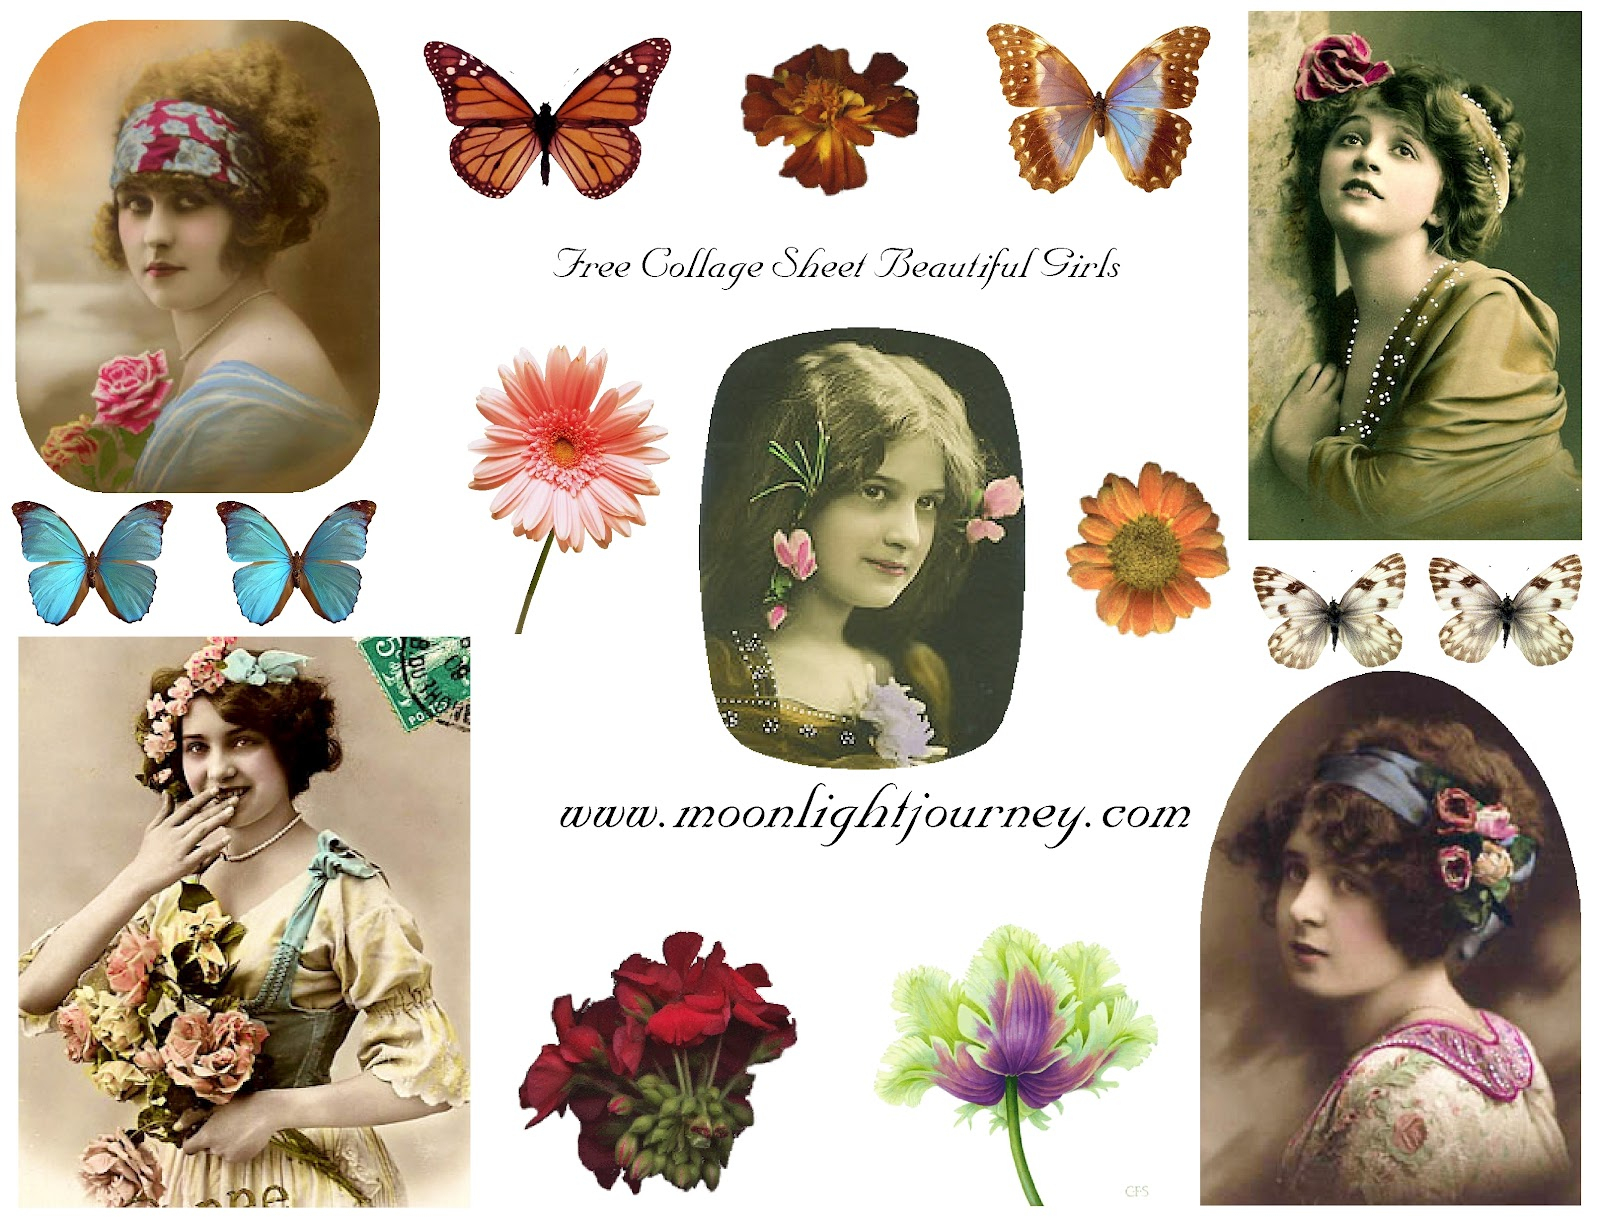 Moonlightjourney: Free Collage Sheets - Free Printable Digital Collage Sheets